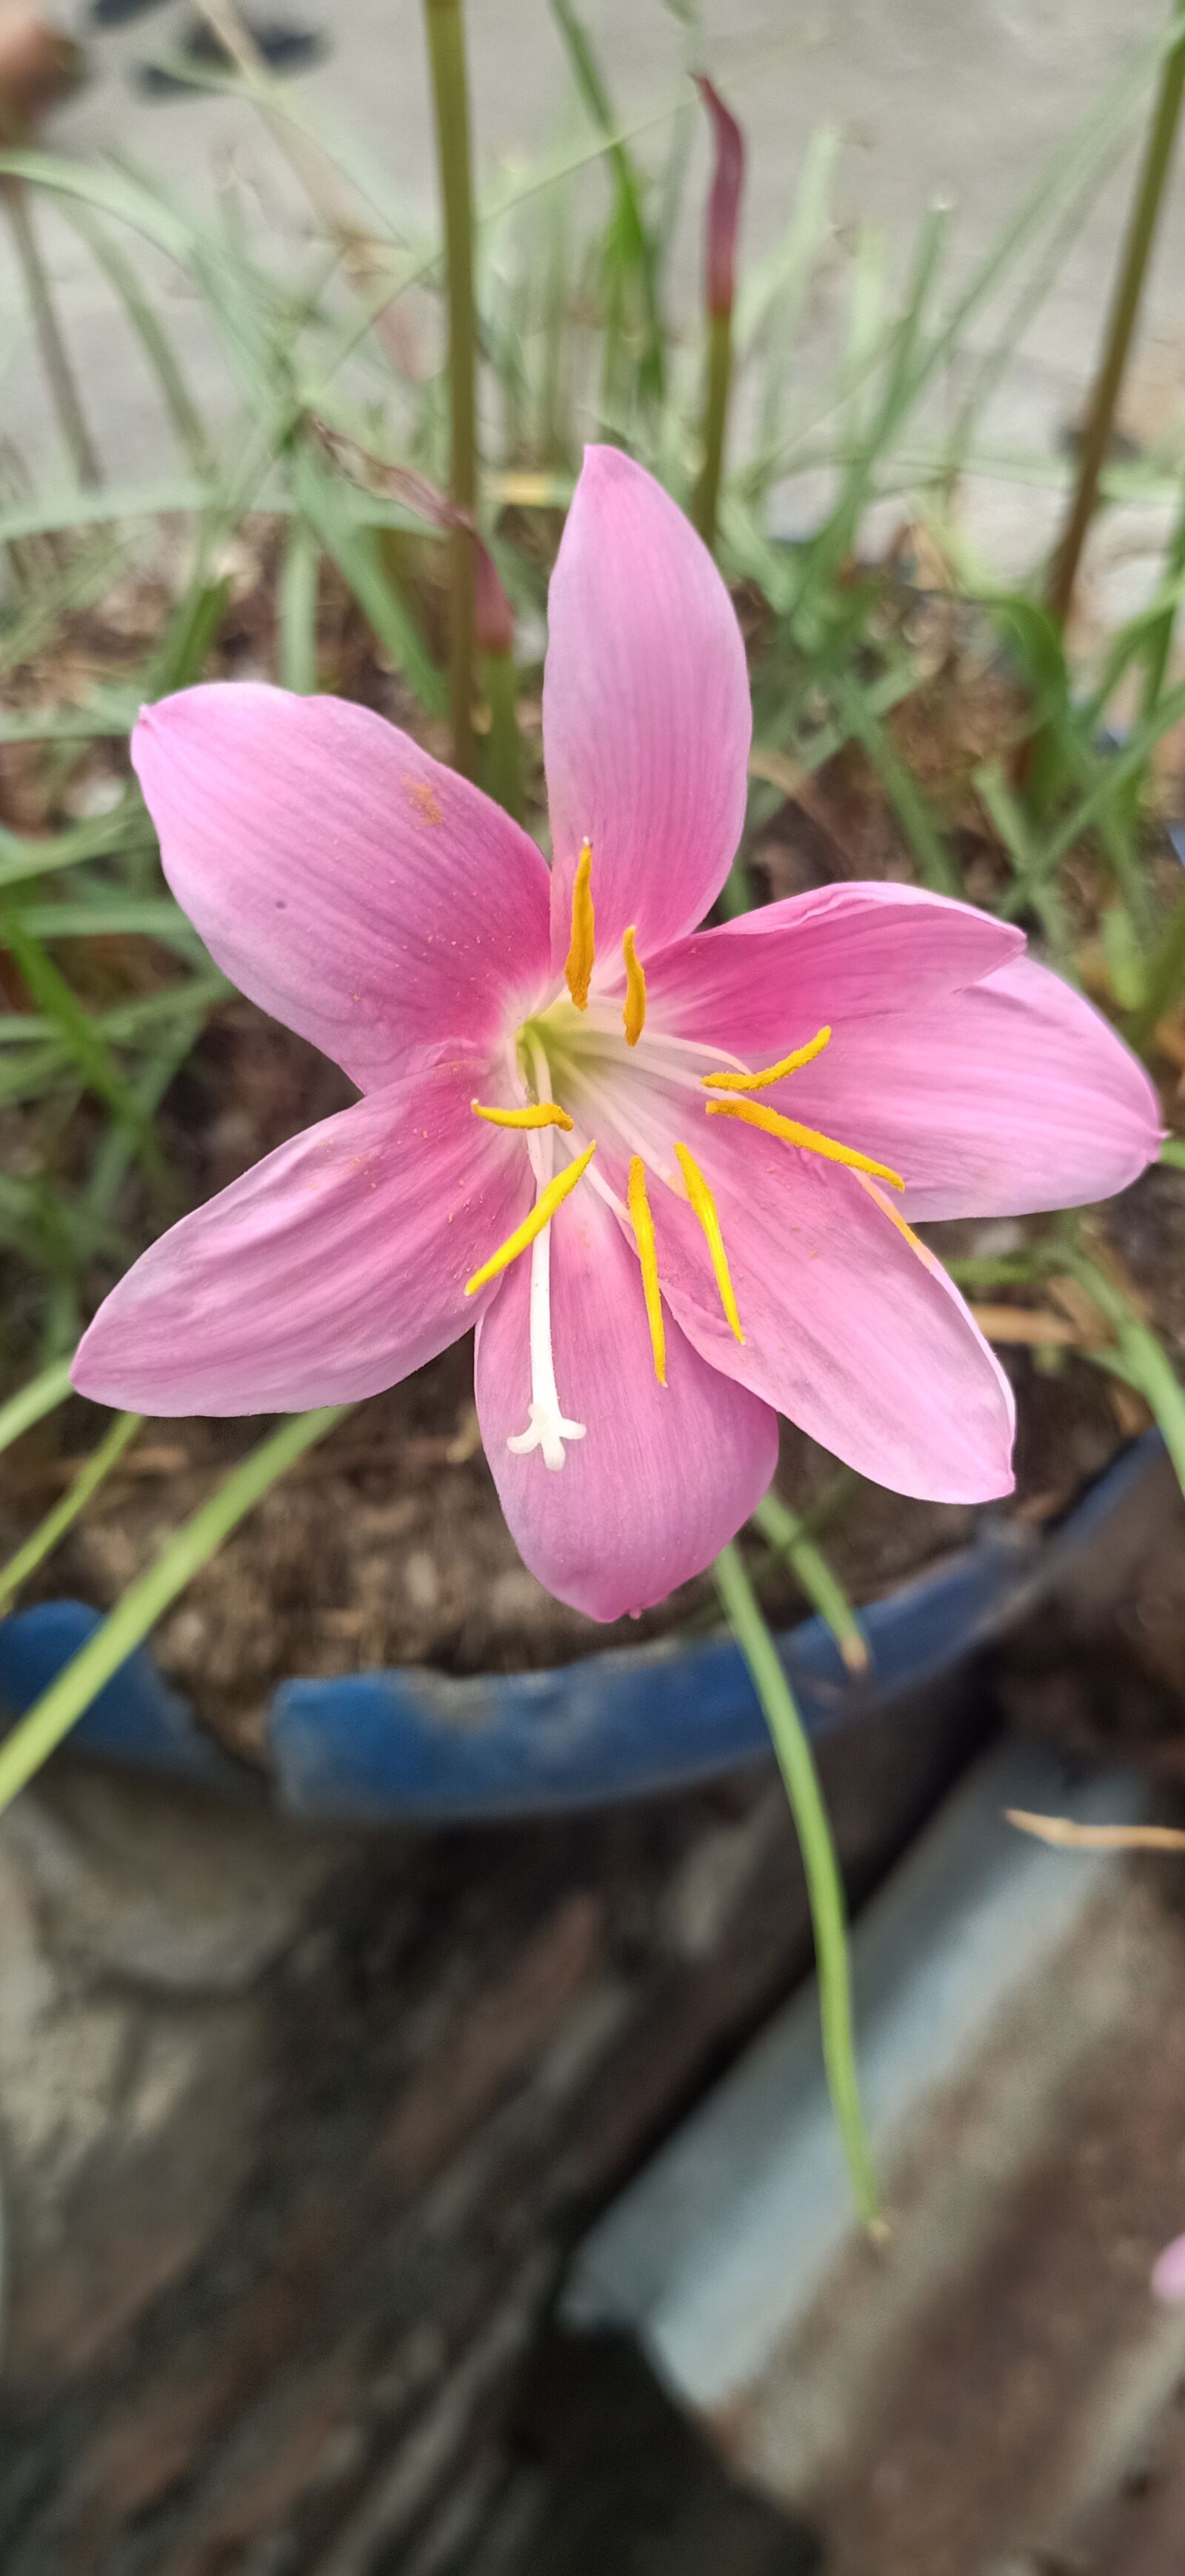 OPPO F11 sample photo. Lily, flower, nature photography